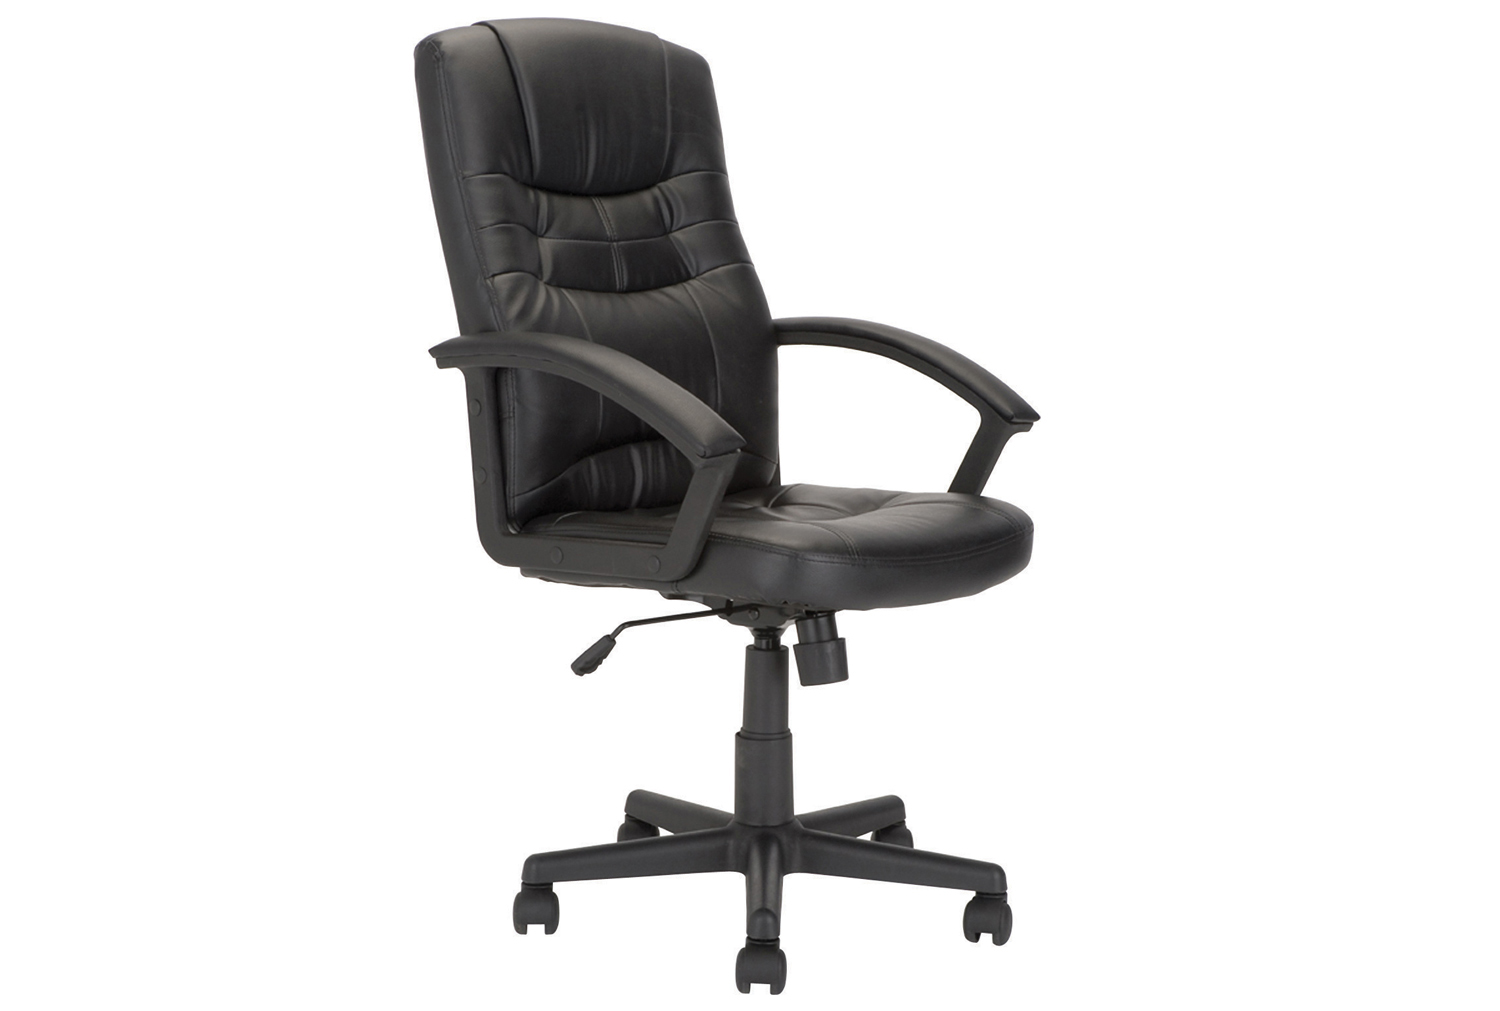 Segato Executive Office Chair, Black, Express Delivery